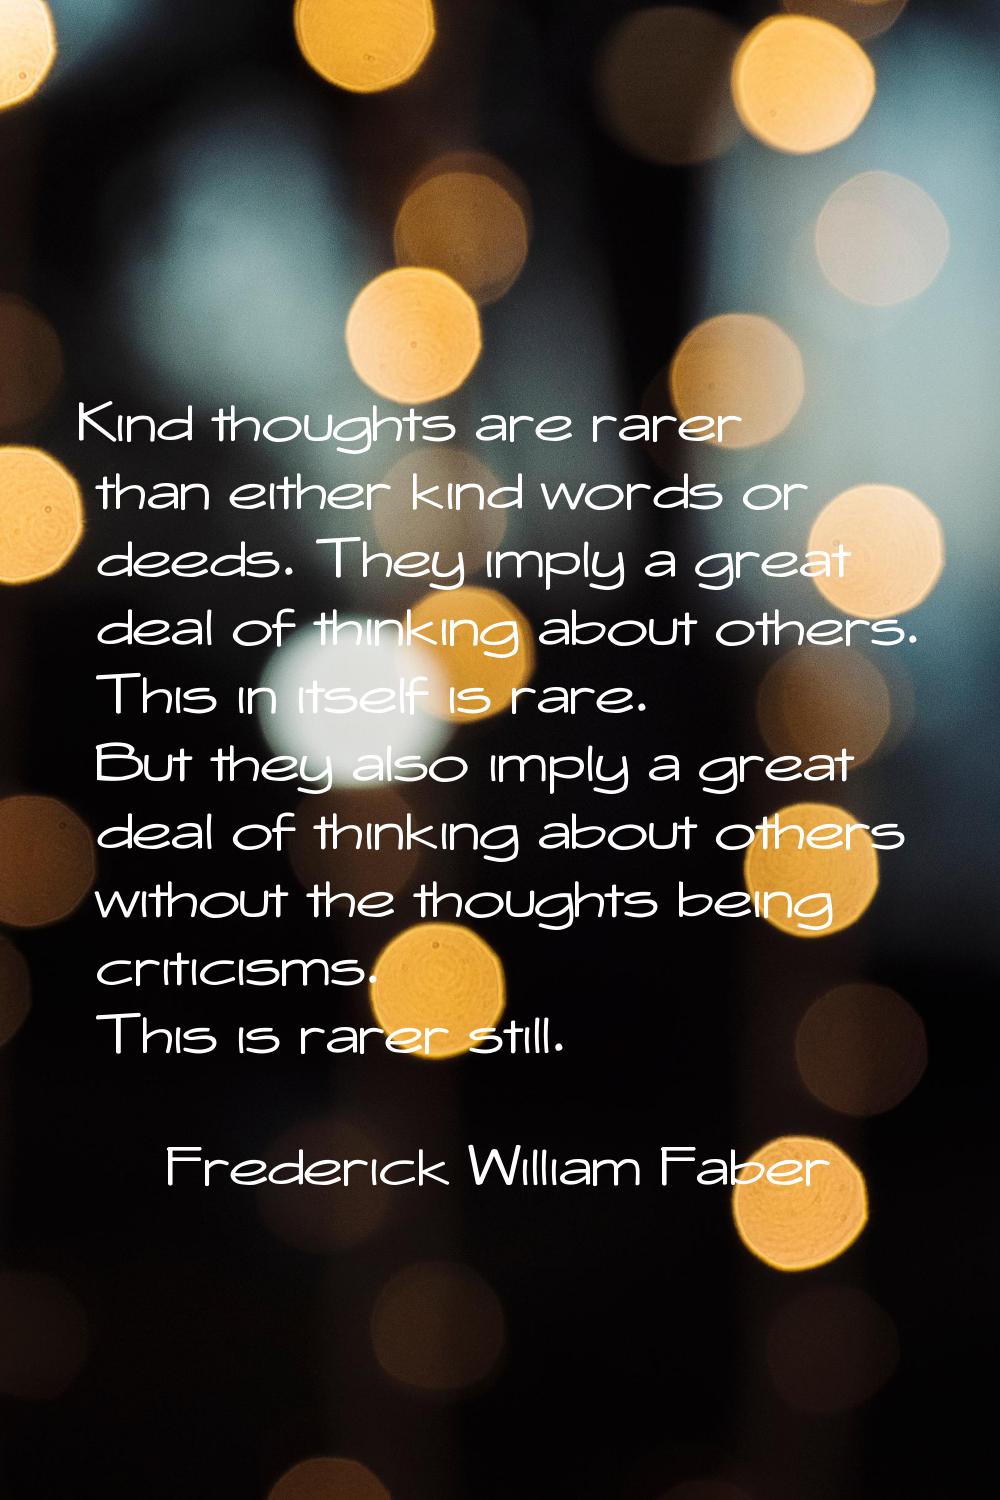 Kind thoughts are rarer than either kind words or deeds. They imply a great deal of thinking about 